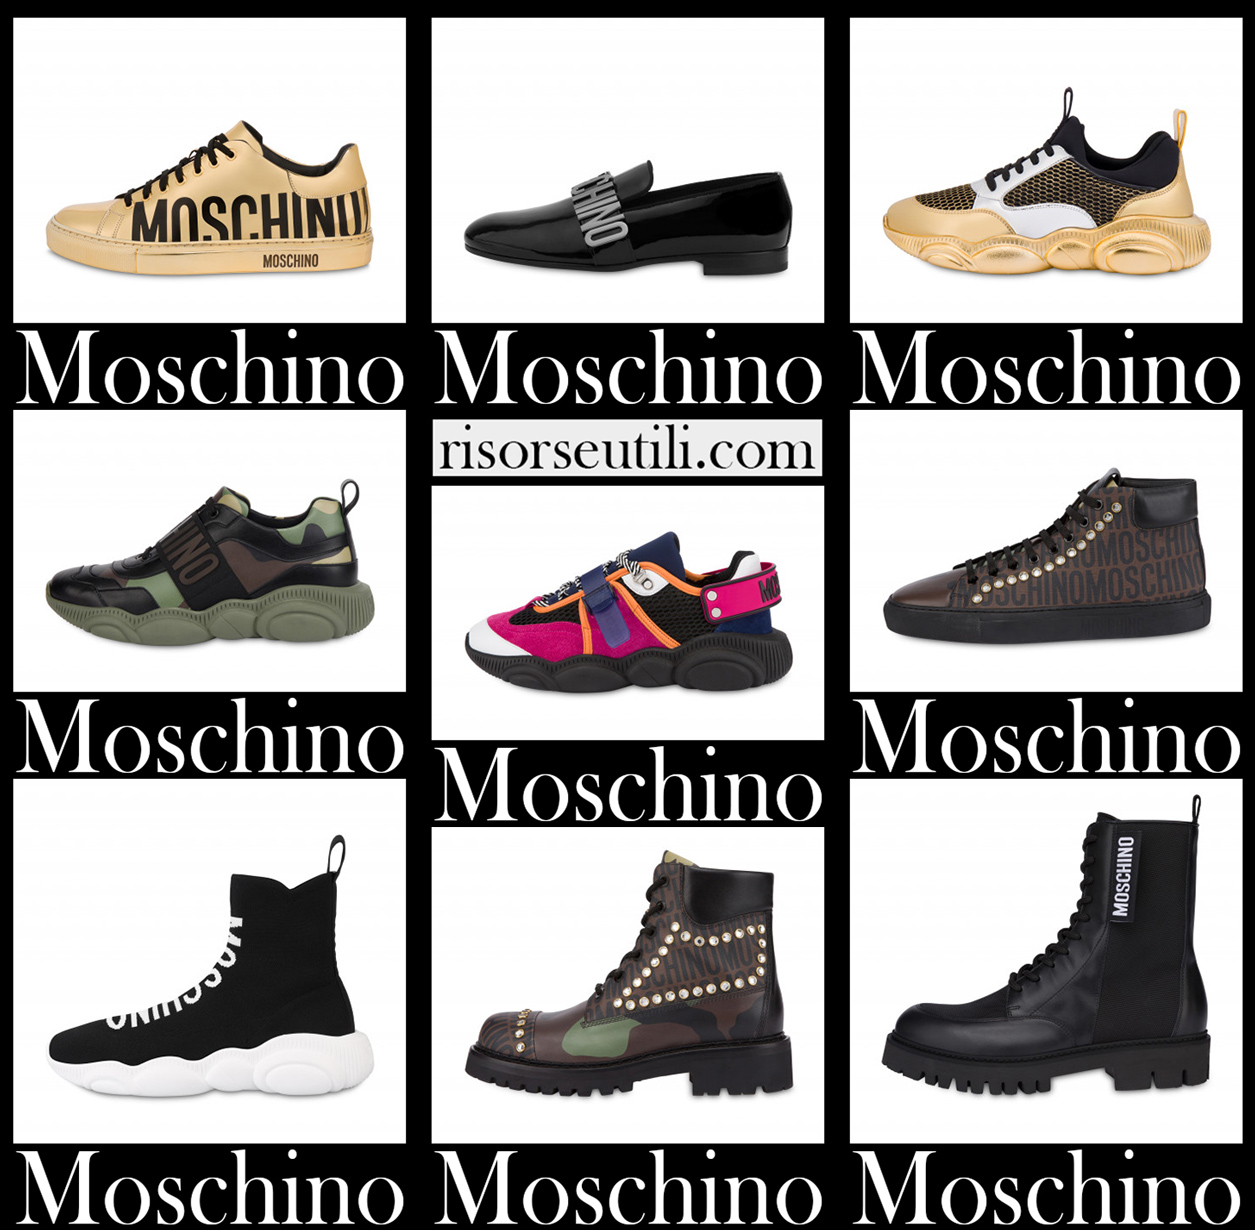 New arrivals Moschino shoes 2021 mens footwear